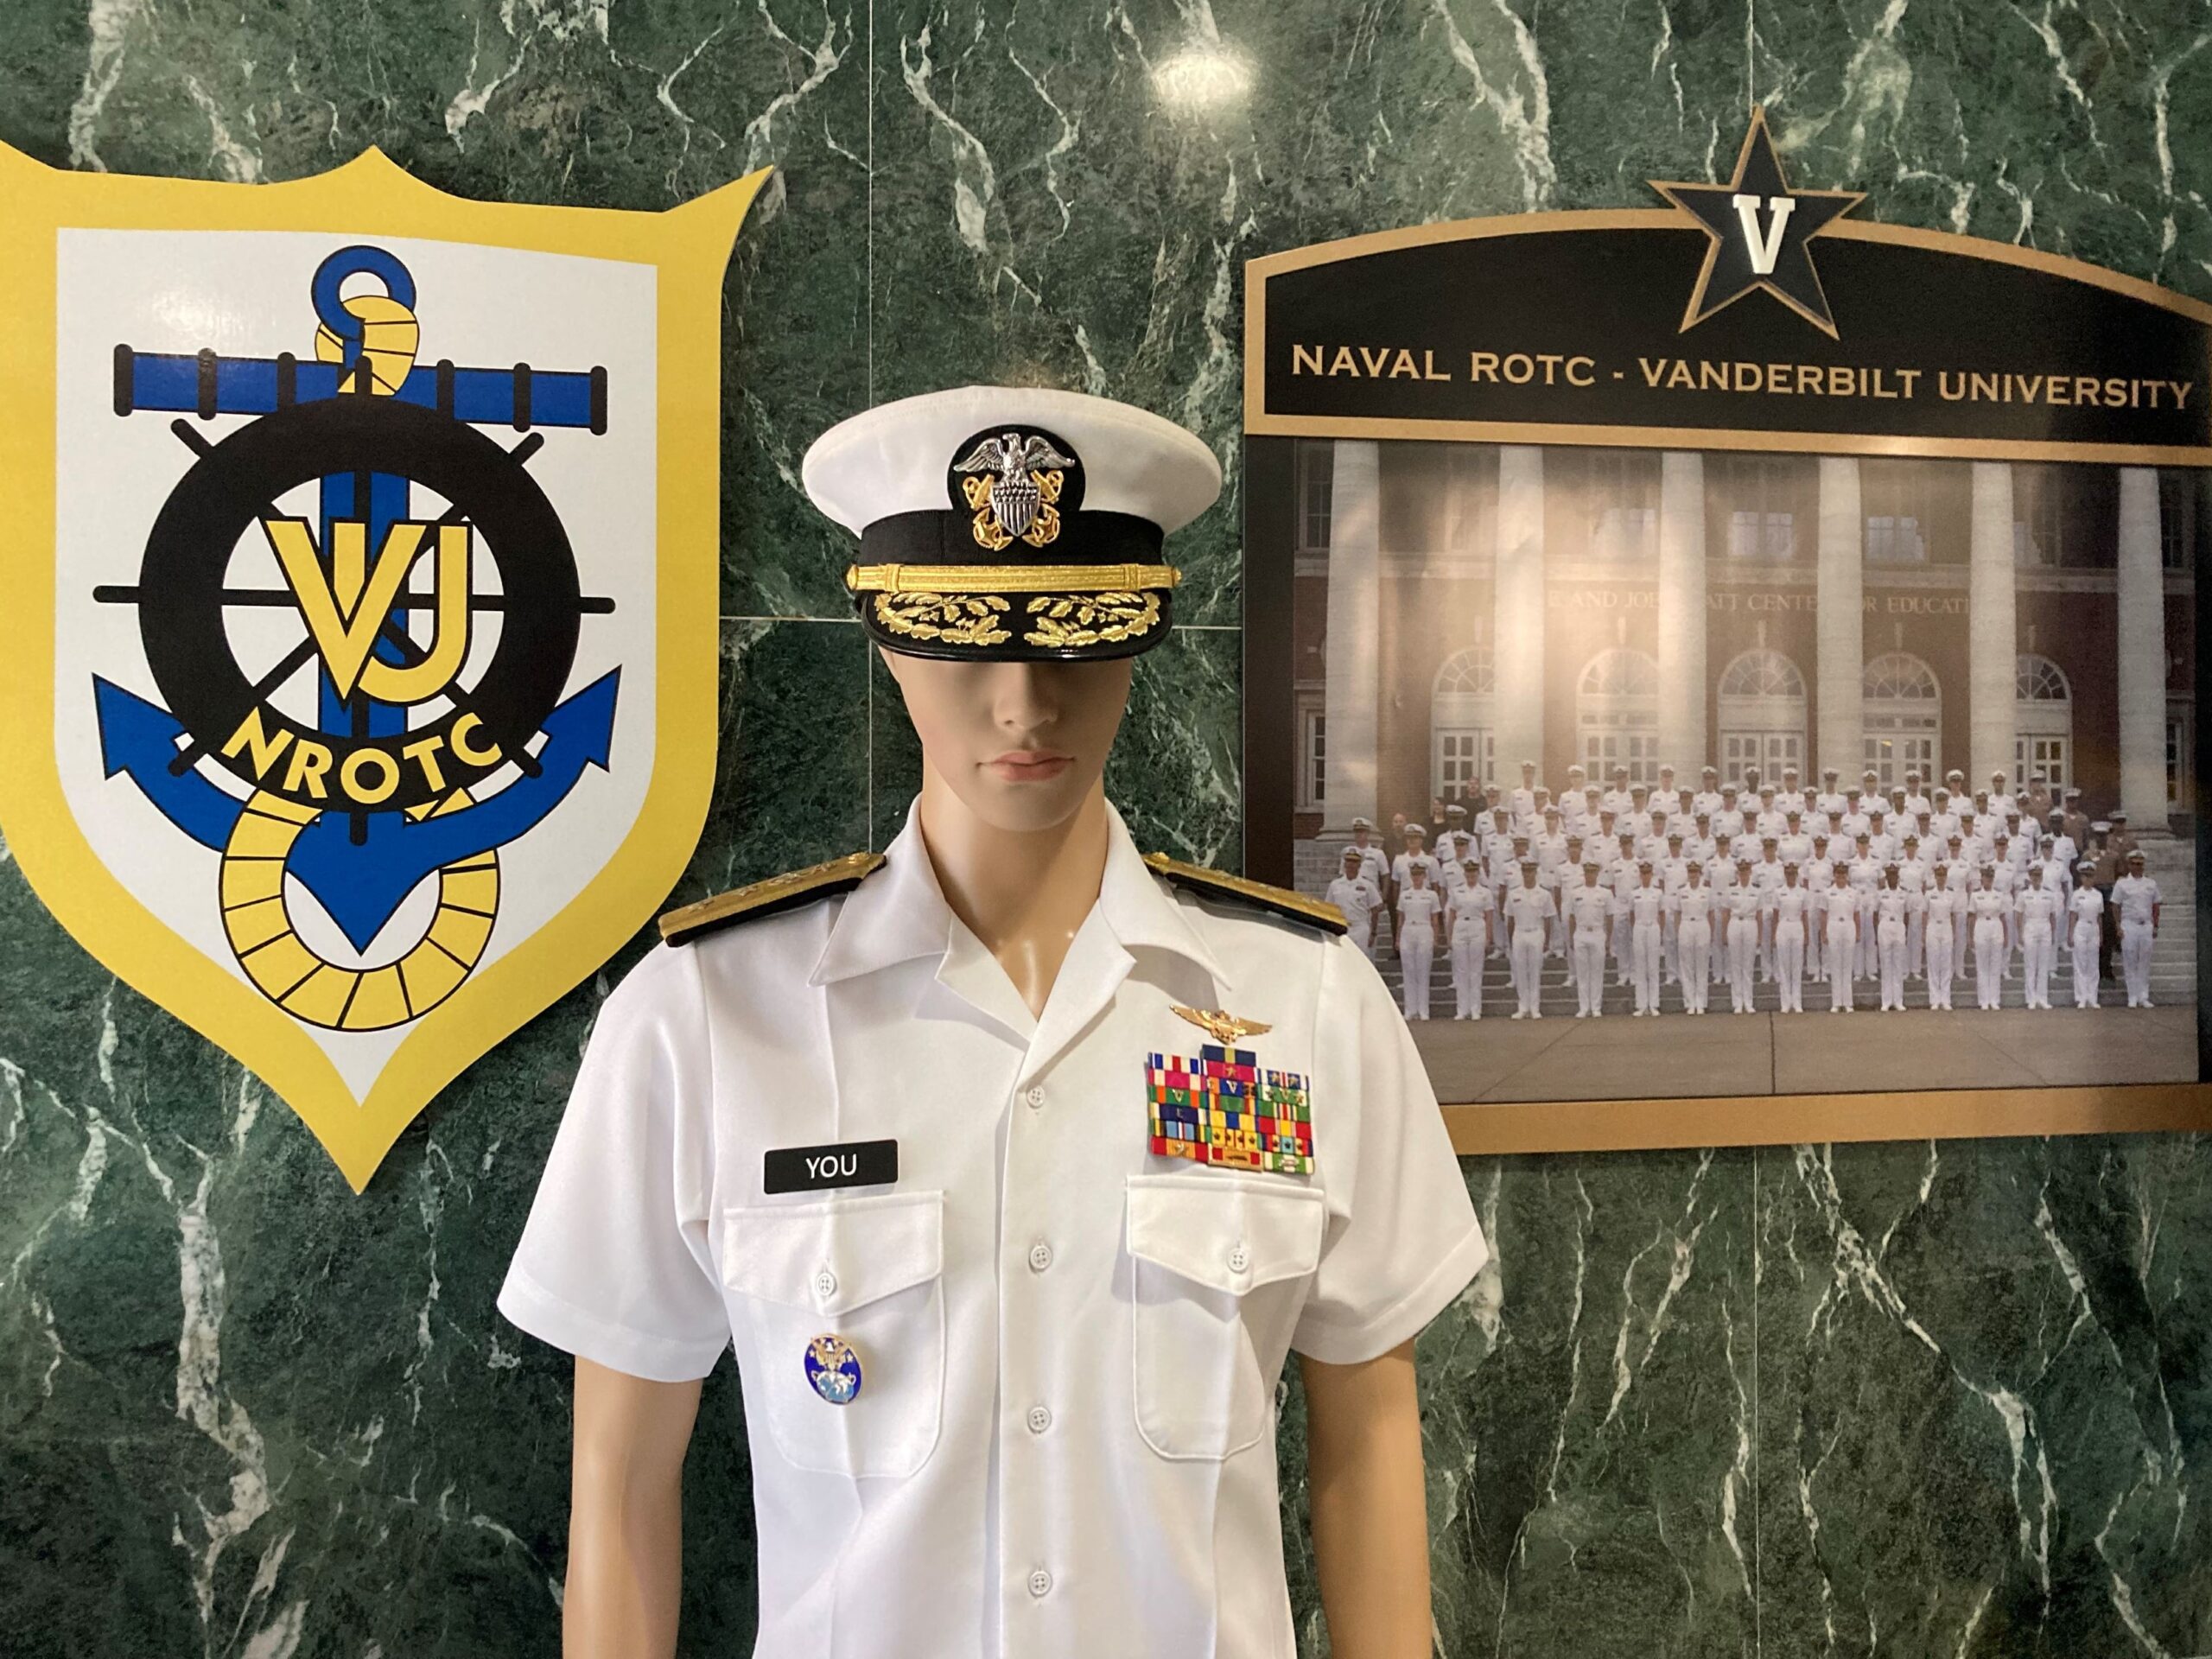 Display at Vanderbilt Navy ROTC unit, including the unit crest, a photo of current midshipmen, and a mannequin wearing a summer white uniform with two star admiral insignia, aviator wings, and a nametag for "YOU"